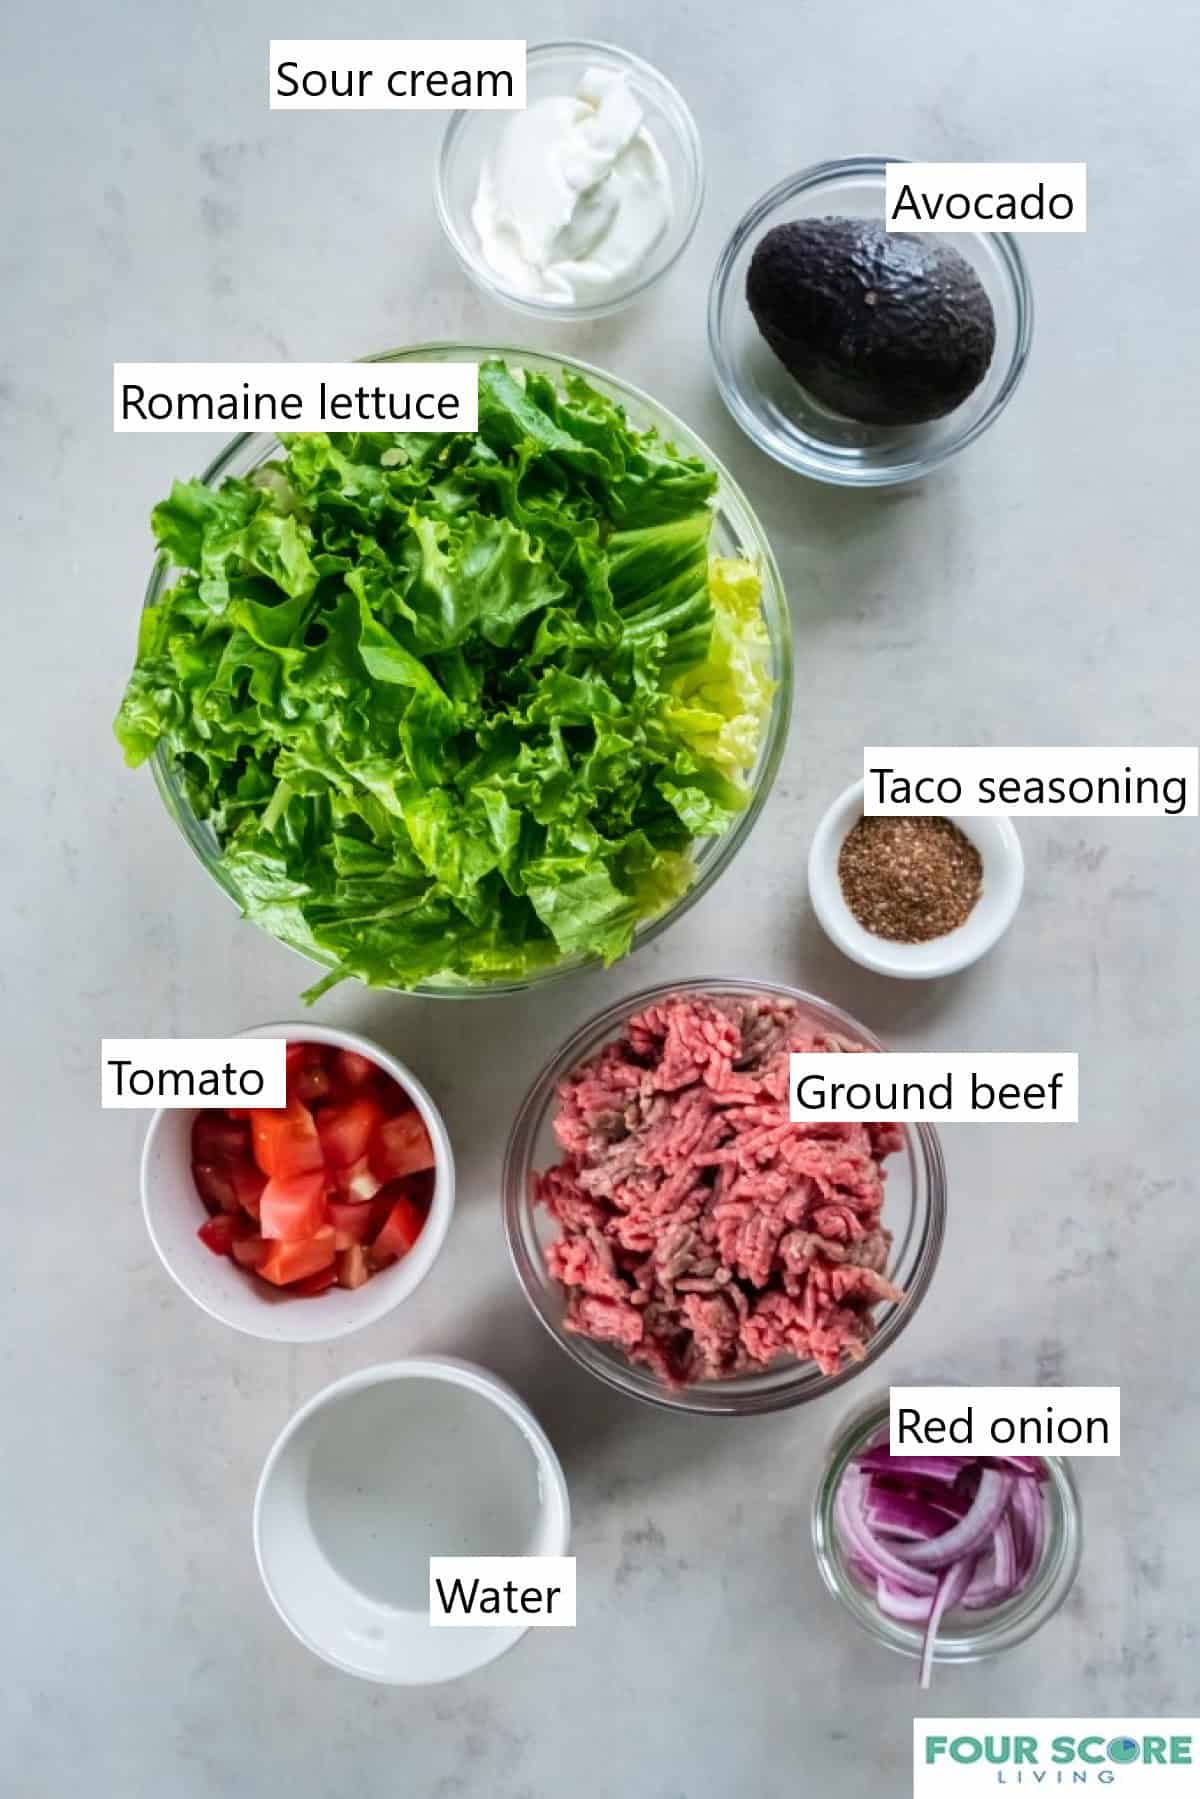 Individual bowls of the ingredients to make a taco salad with chopped lettuce, raw ground beef, chopped tomatoes, taco seasoning, sour cream and a whole avocado.